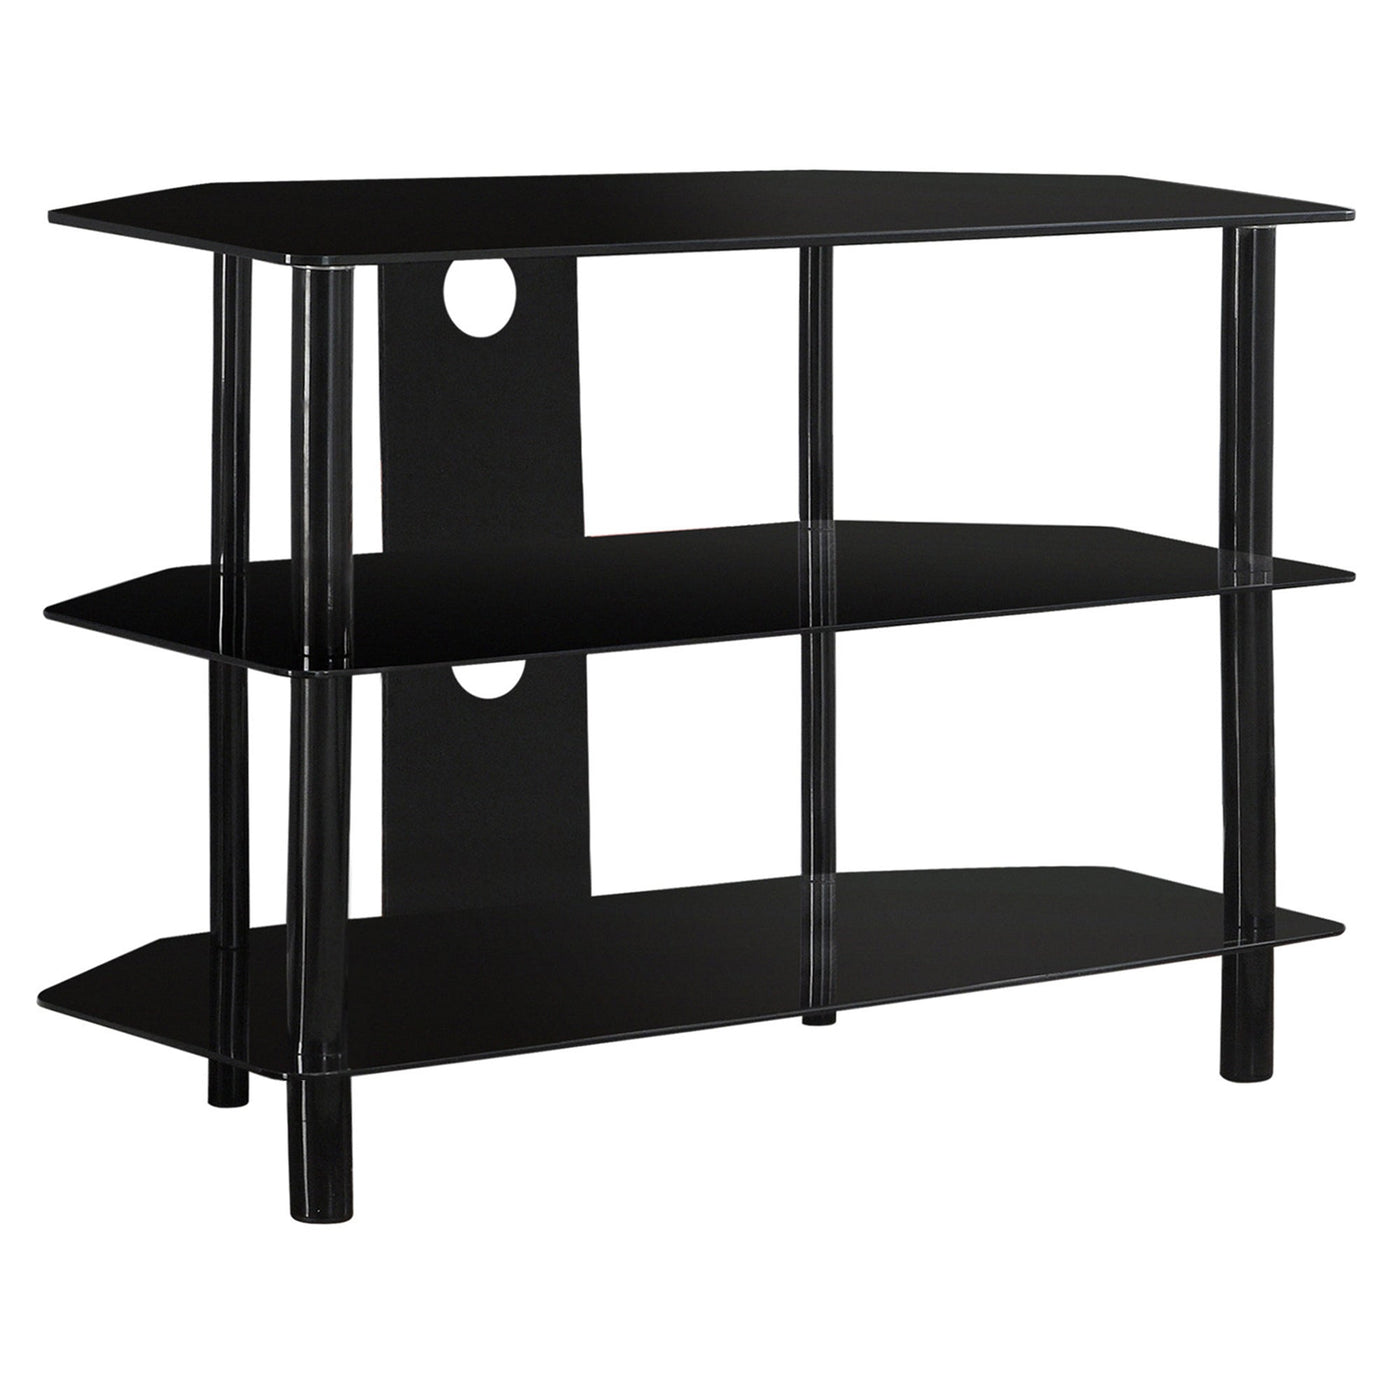 15.75’ X 35.75’ X 24’ Black Metal Tempered Glass TV Stand - TV Stands